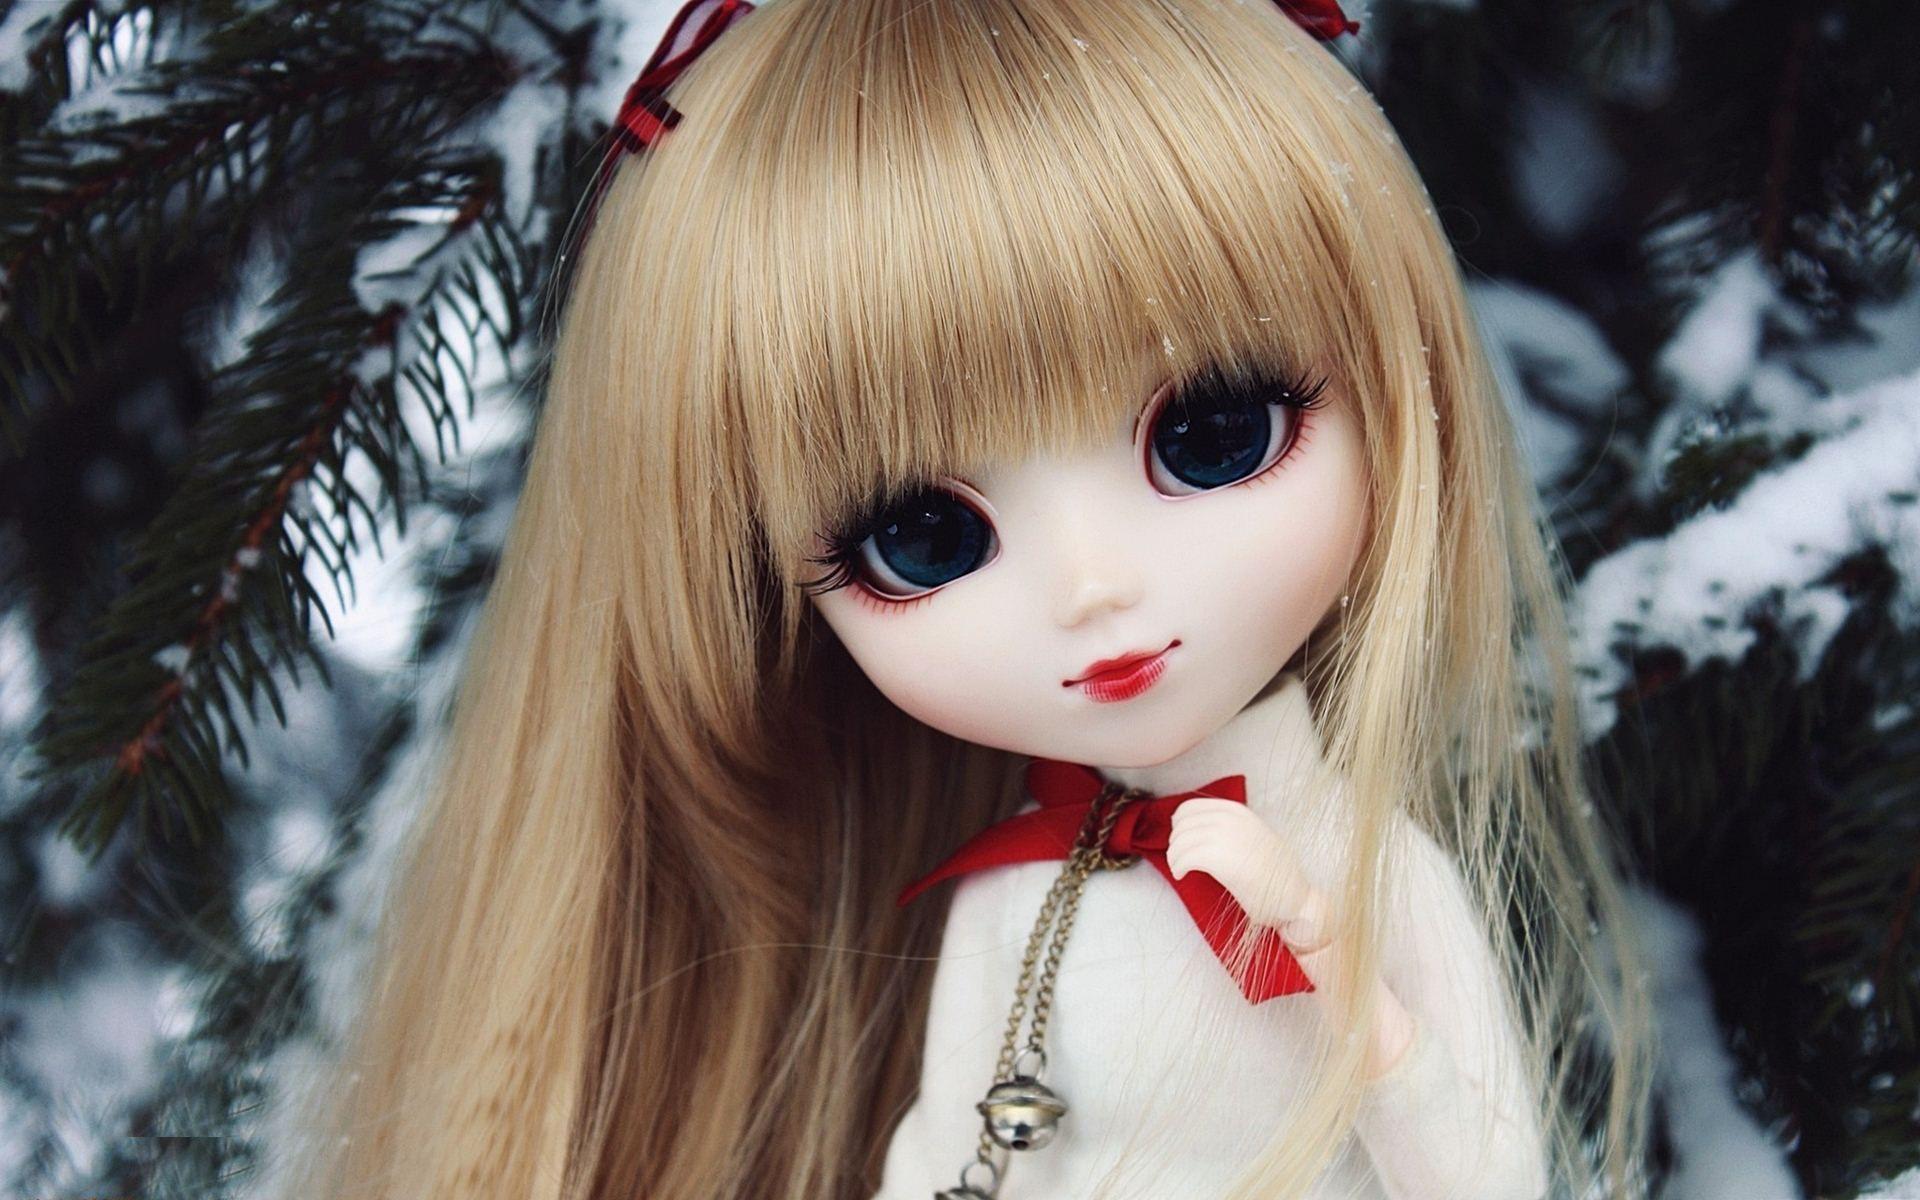 Wallpaper.wiki Cute Background Of Dolls Hd PIC WPB009233